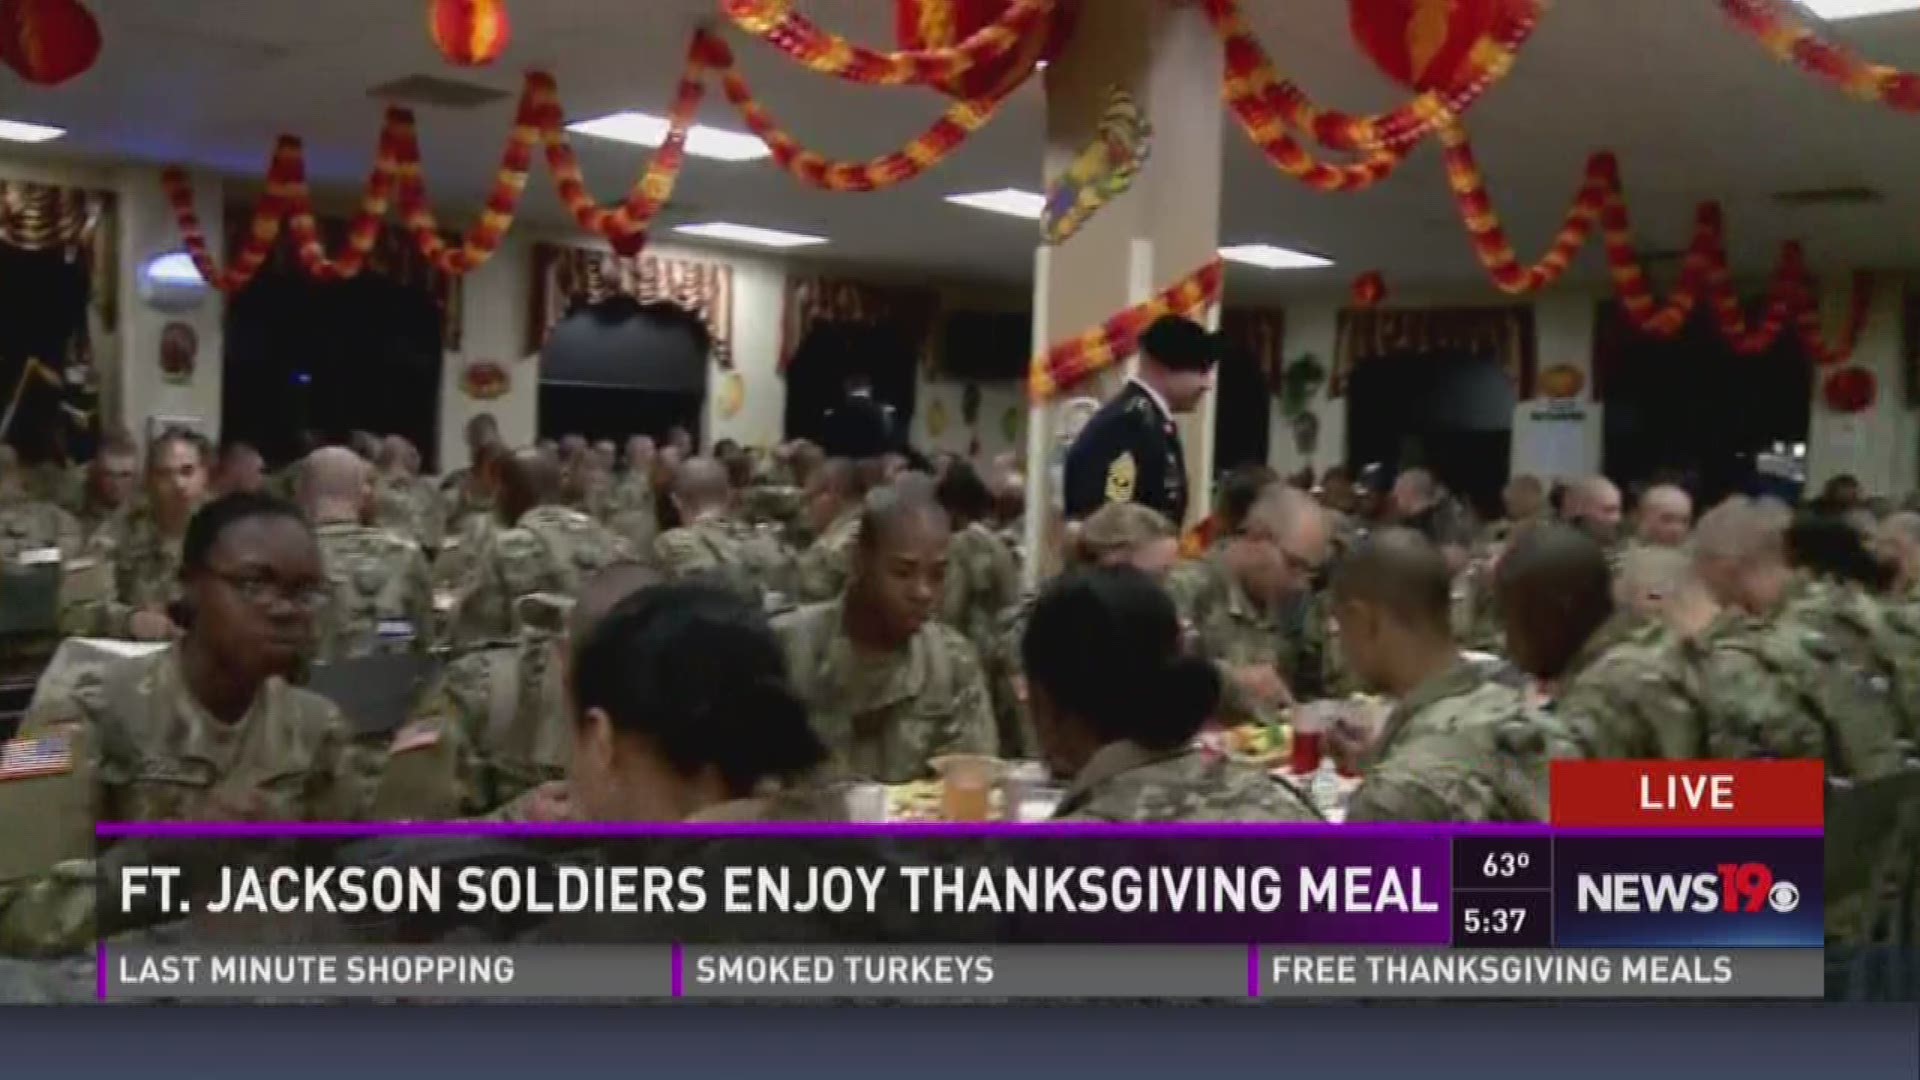 Ft. Jackson Soldiers Enjoy a Thanksgiving Meal